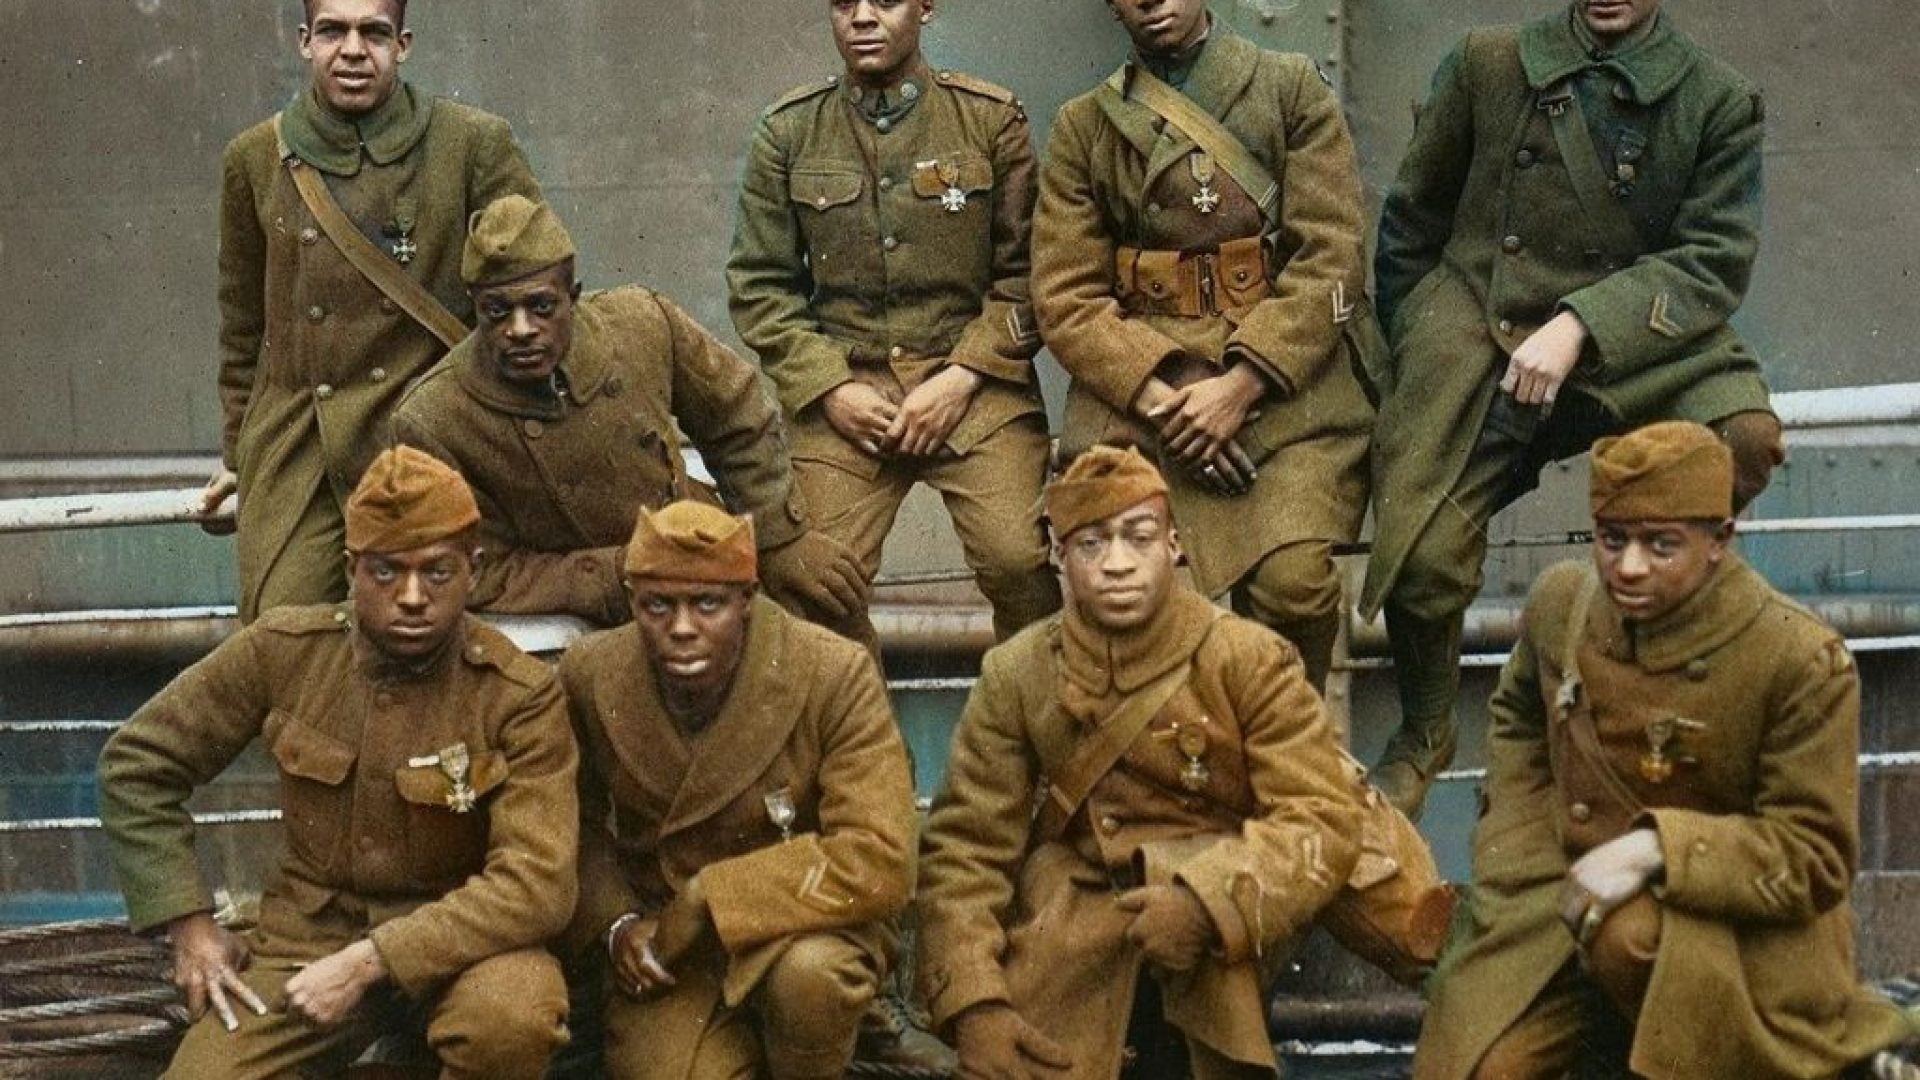 These Black Vets Were Even Bigger Targets Of Racism After Their Service